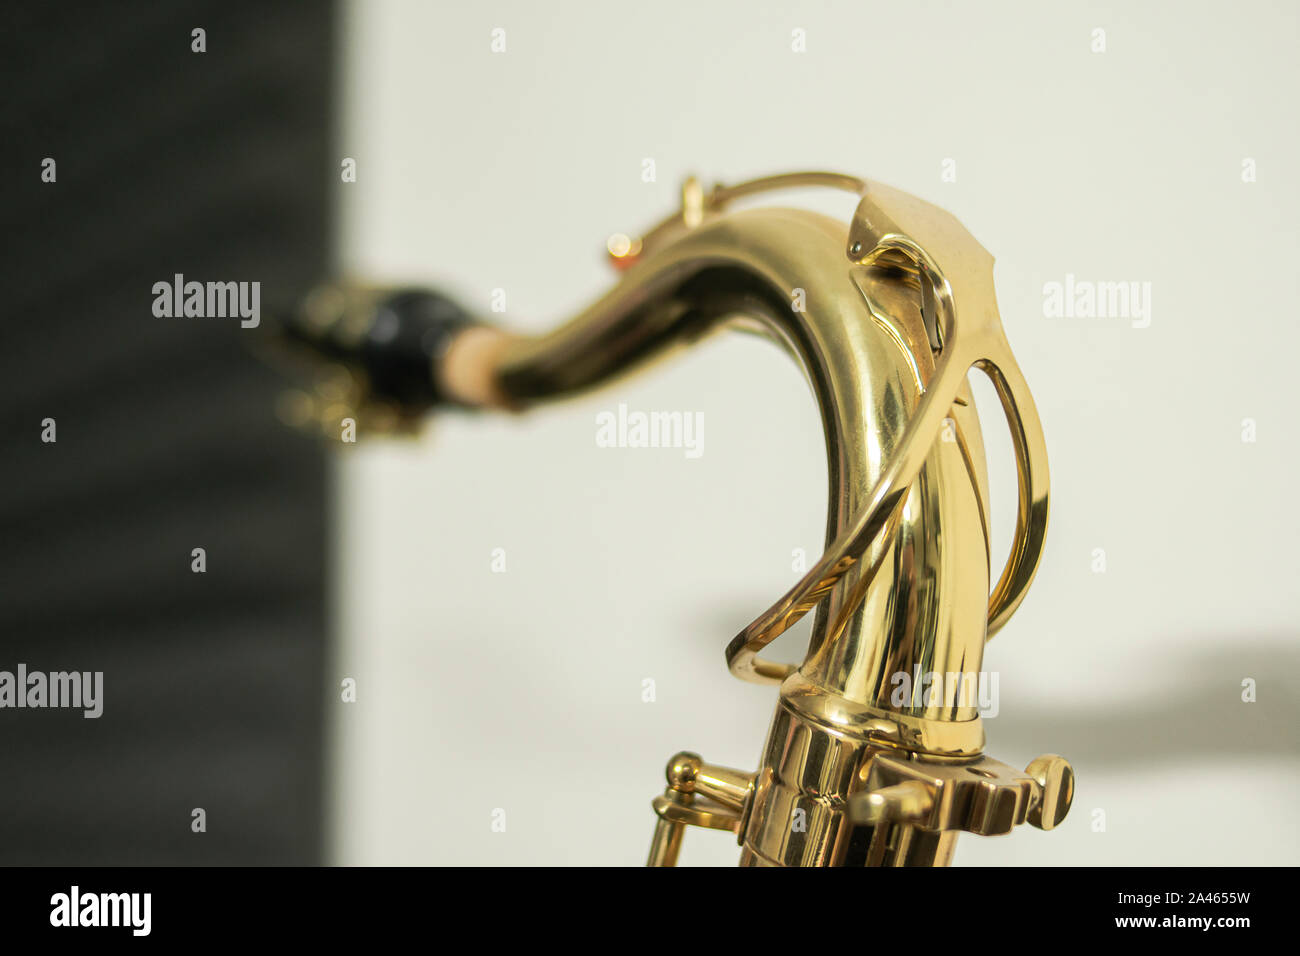 Close-up of the tudel or neck of a golden and shiny tenor sax where you can see the construction details of it Stock Photo